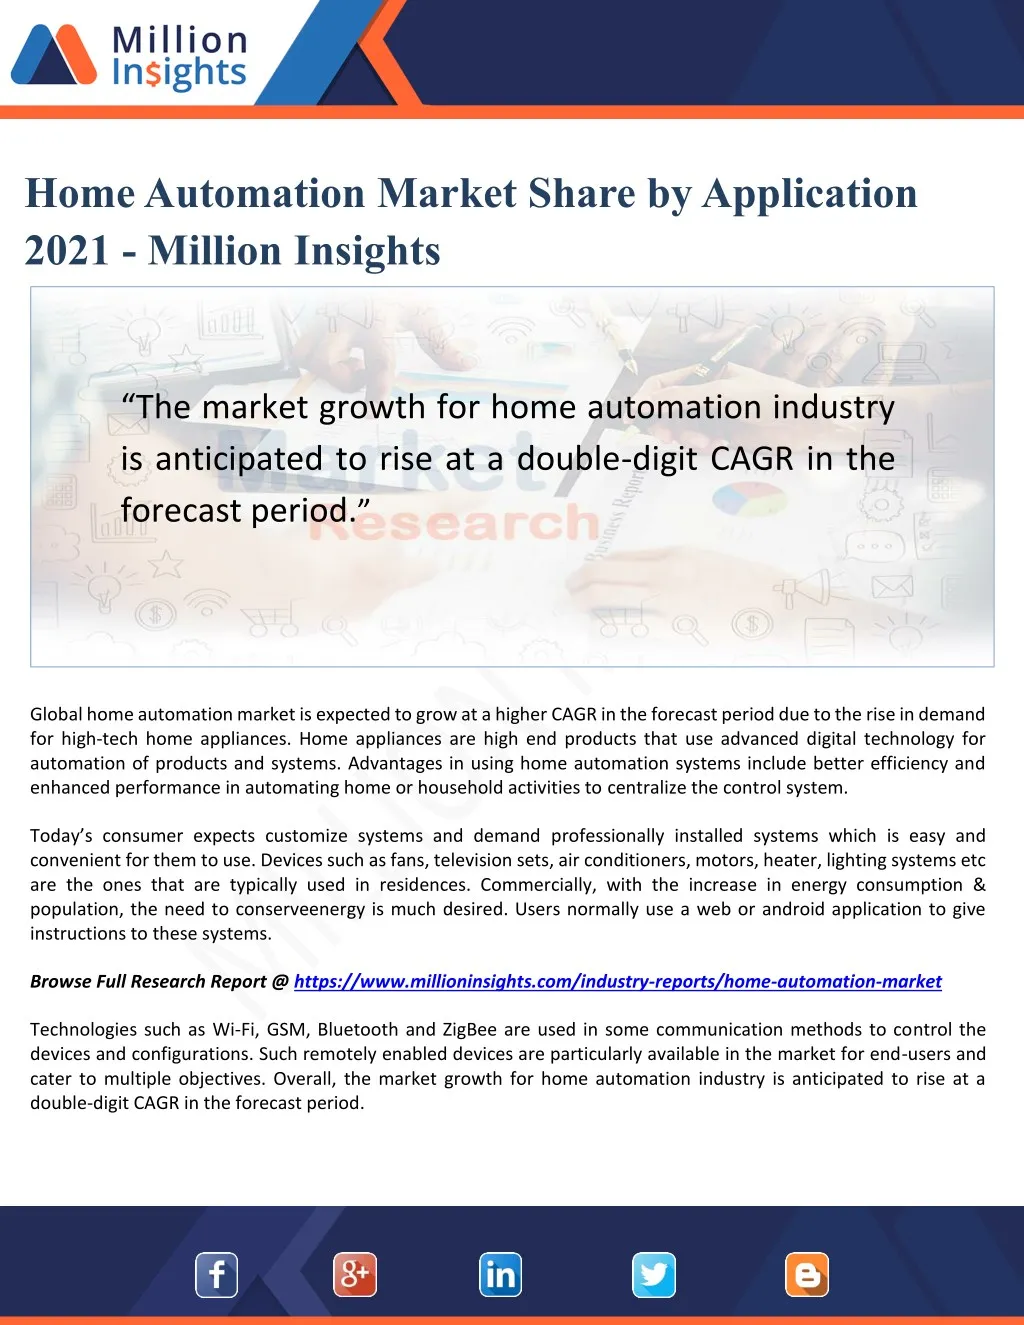 home automation market share by application 2021